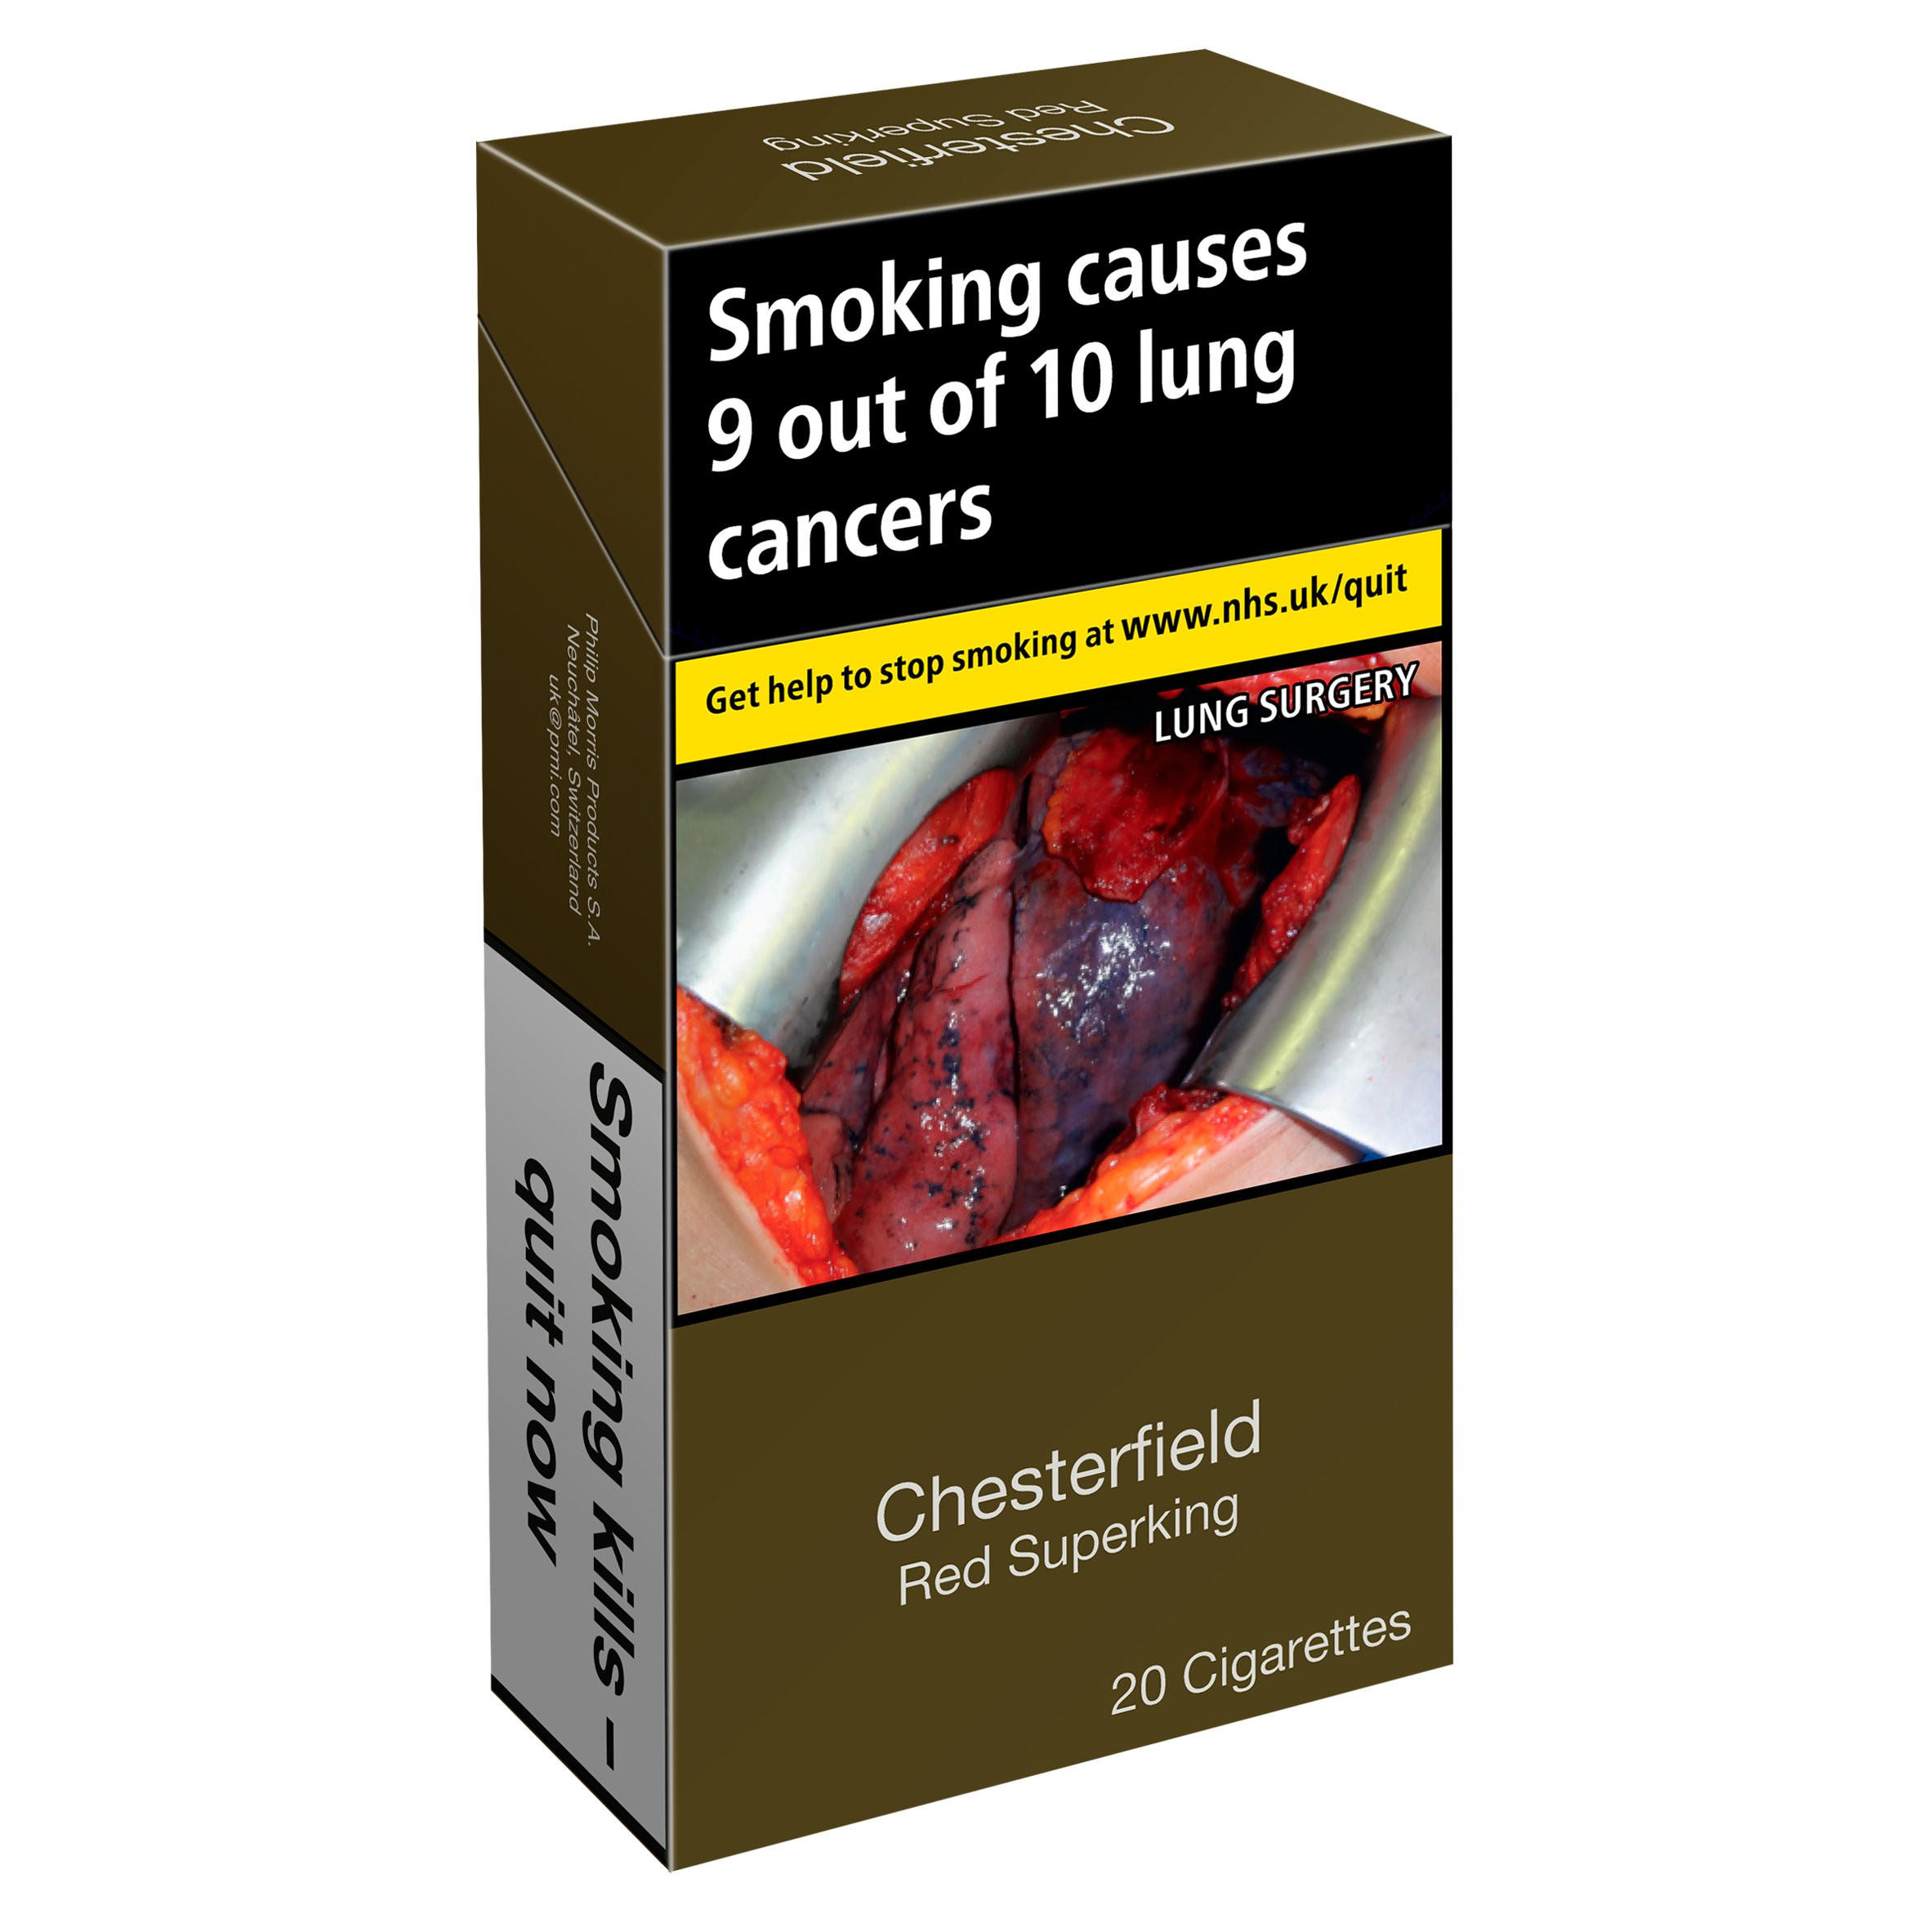 Chesterfield Red Superking 20 Cigarettes | Electronic Cigarettes ...